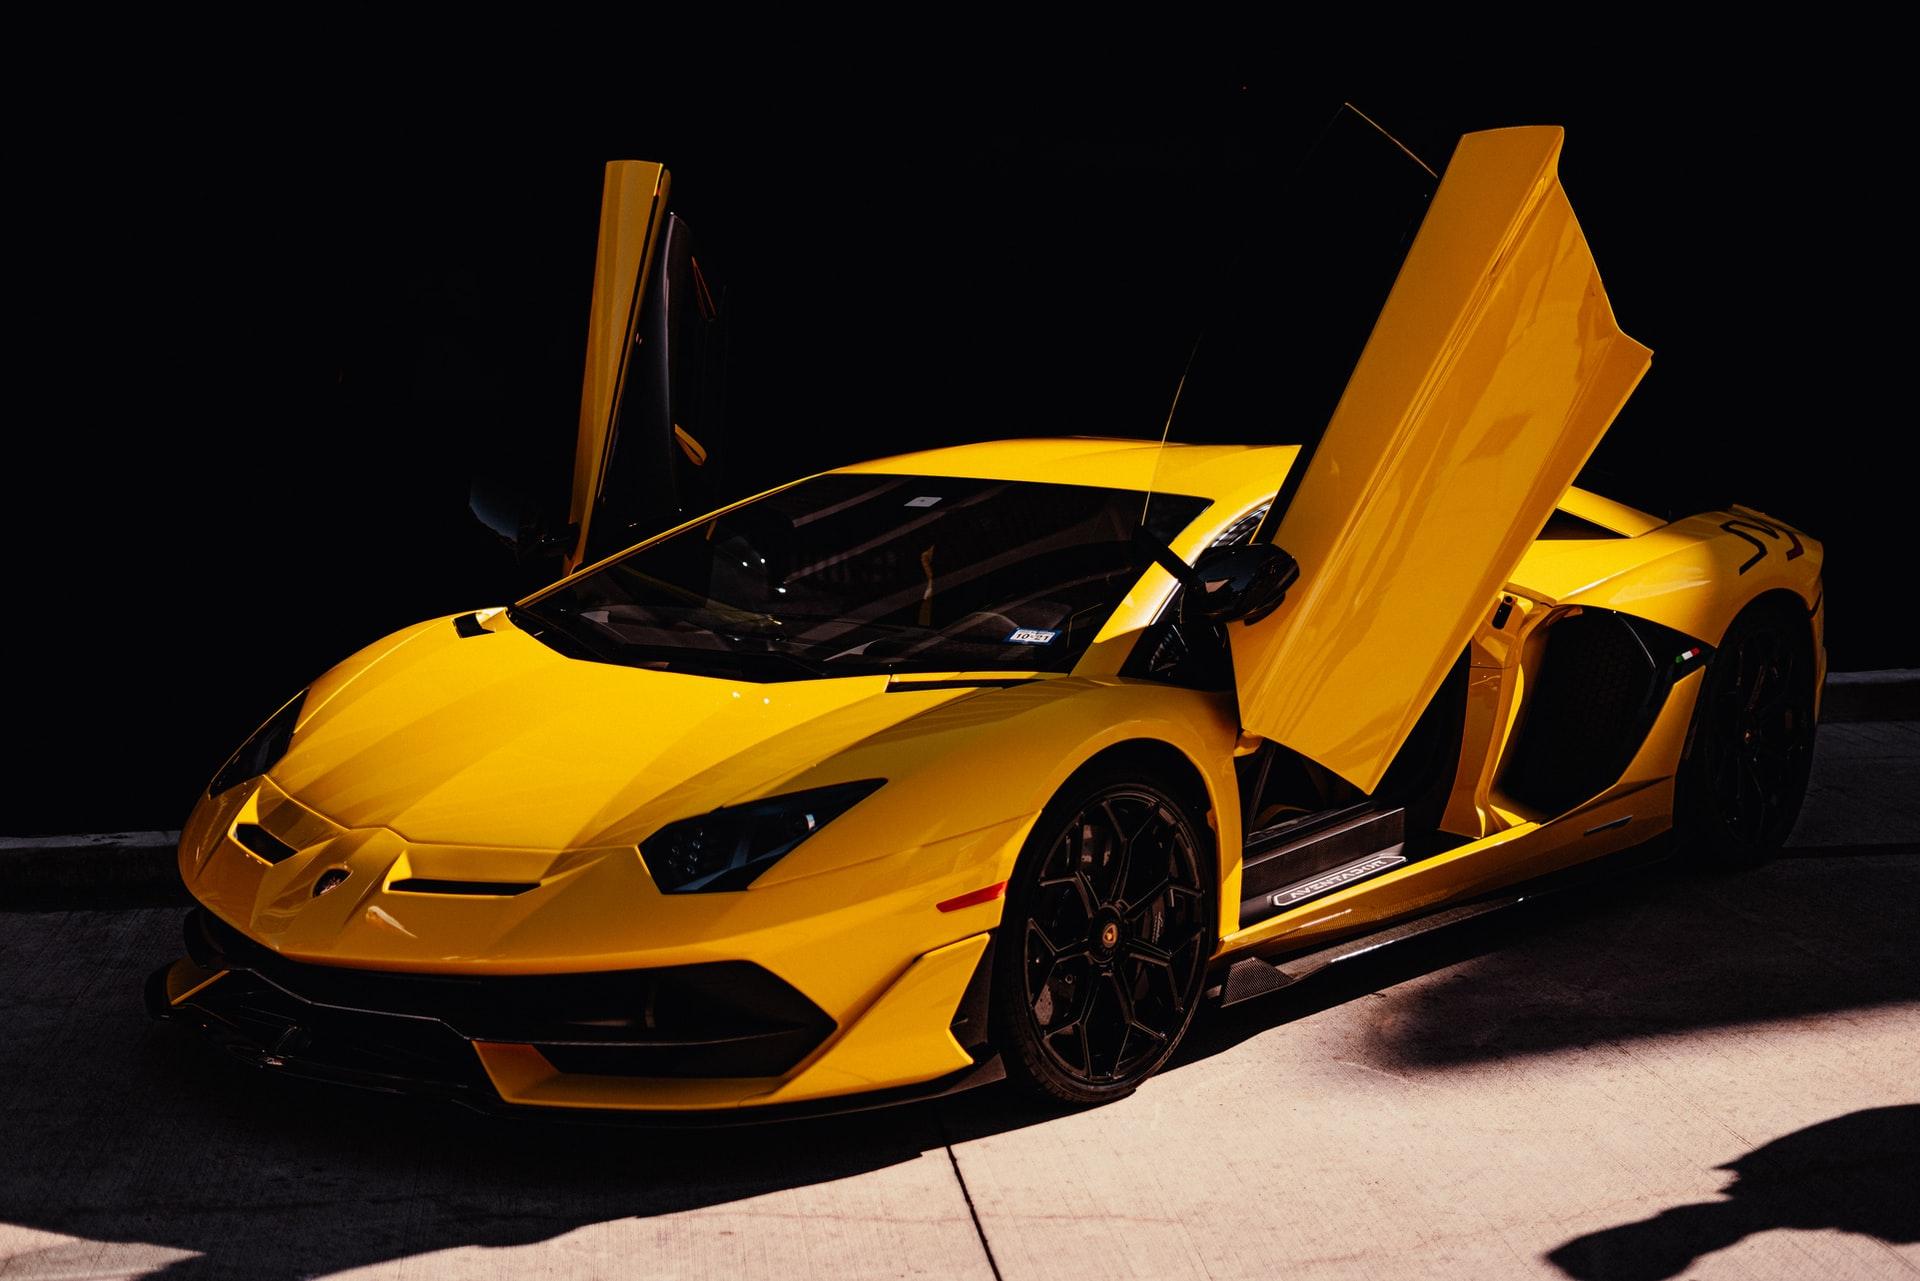 Scissor doors are an iconic part of some luxury models.